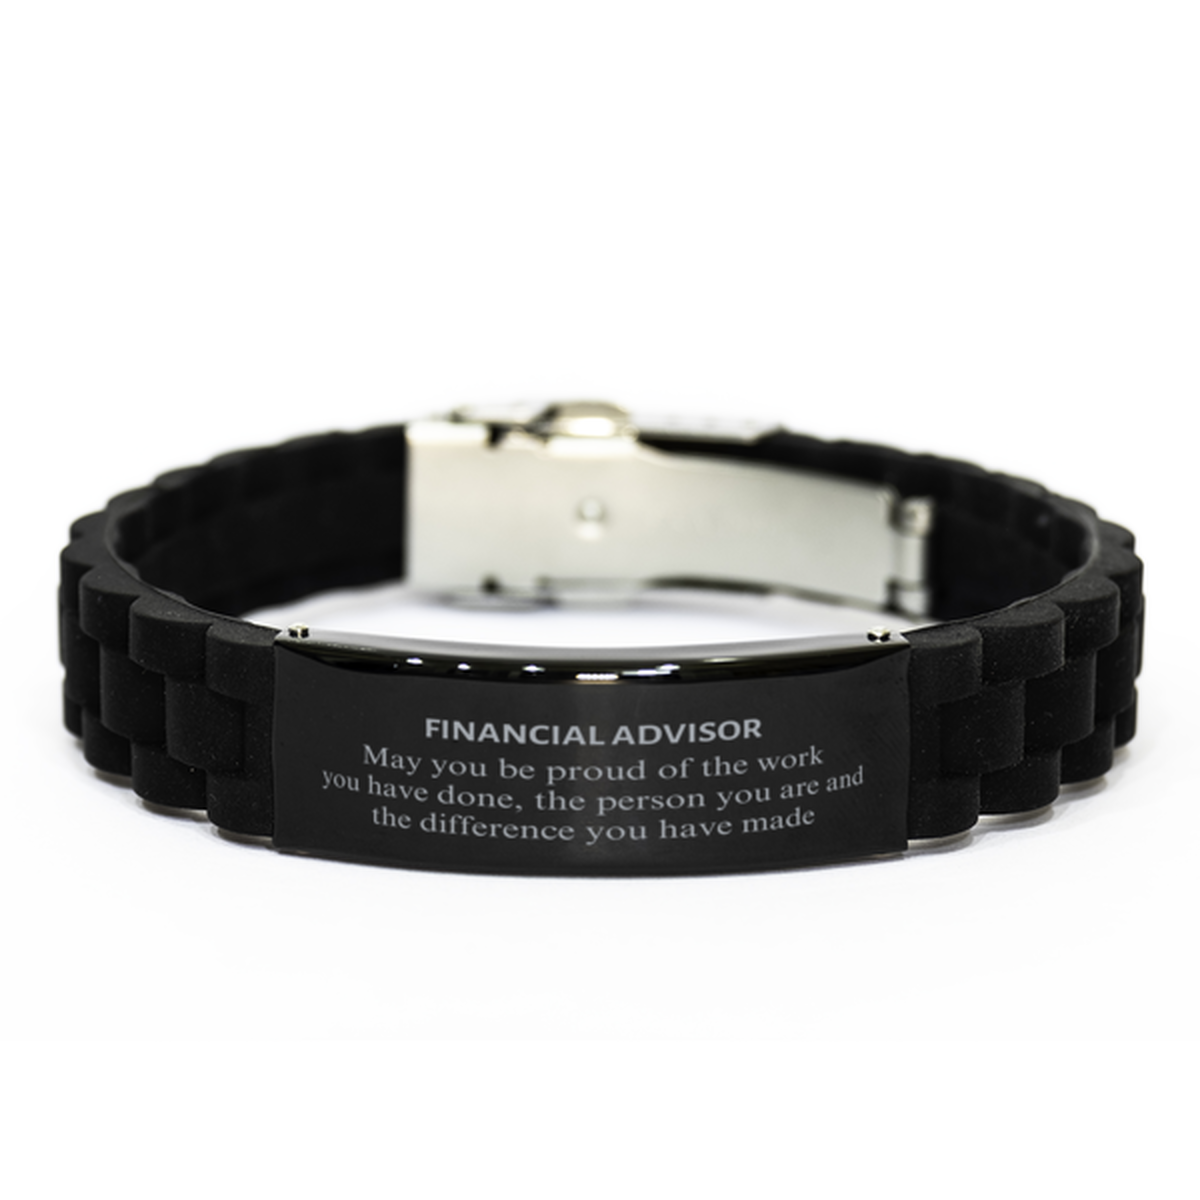 Financial Advisor May you be proud of the work you have done, Retirement Financial Advisor Black Glidelock Clasp Bracelet for Colleague Appreciation Gifts Amazing for Financial Advisor